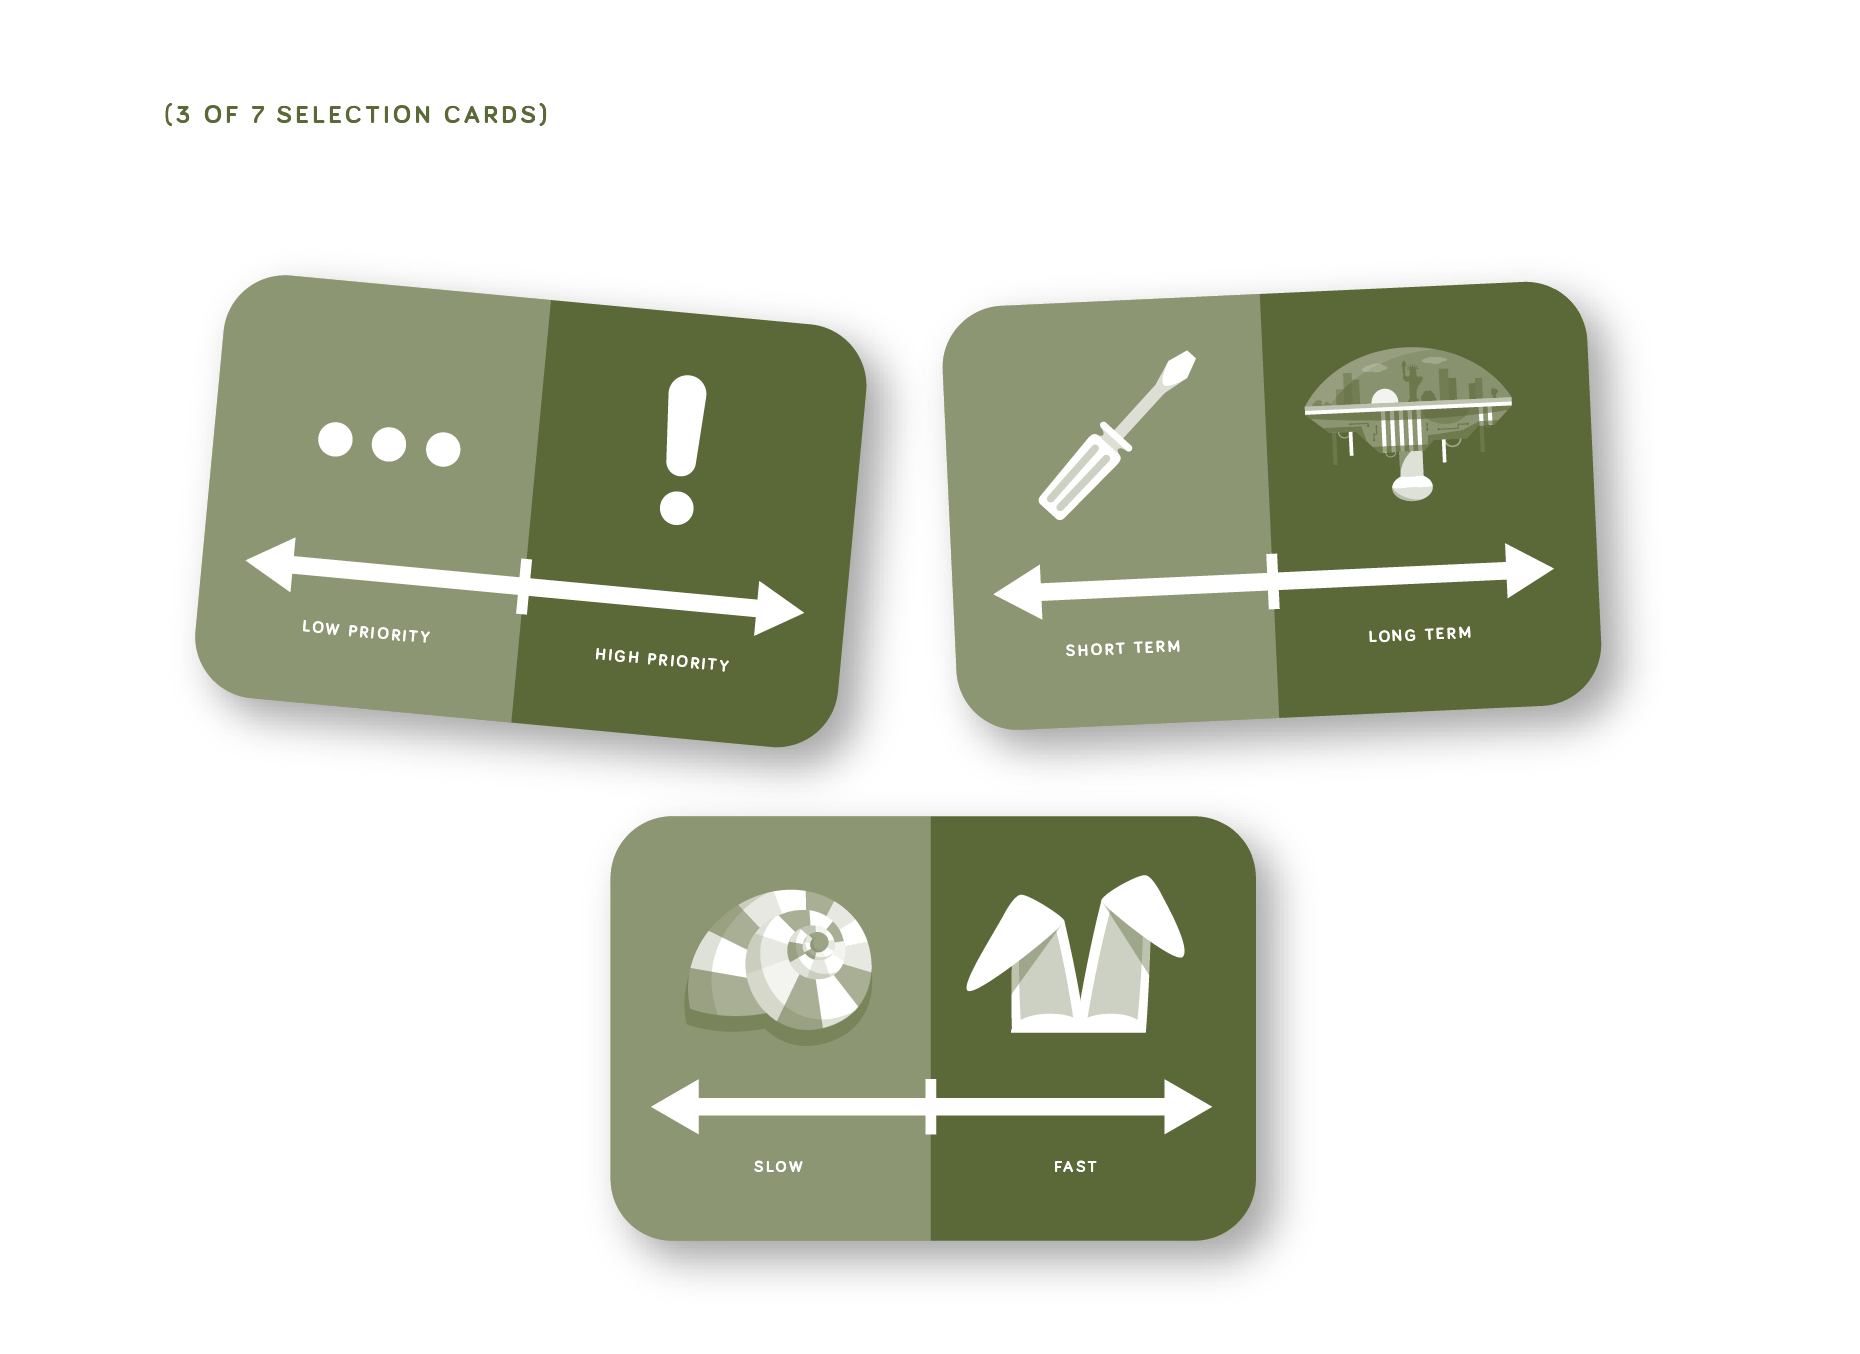 MethodKit for Cities Selection Cards